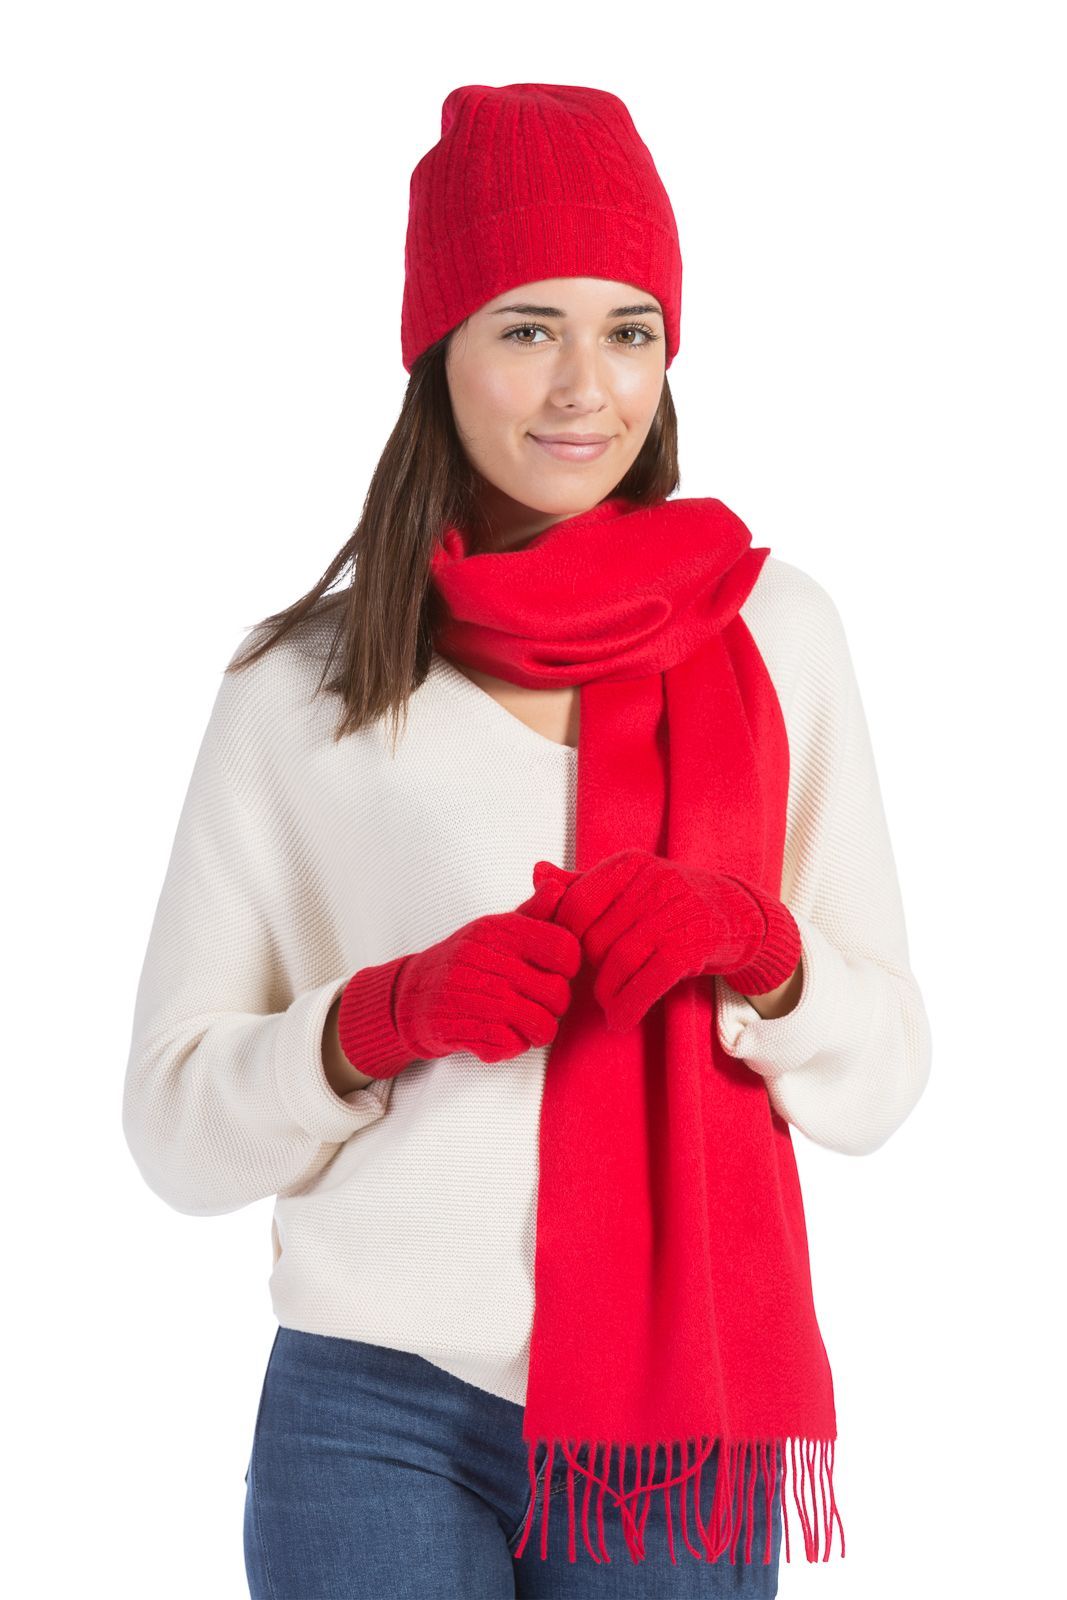 Fishers Finery Women's Cashmere Hat, Gloves, Scarf Gift